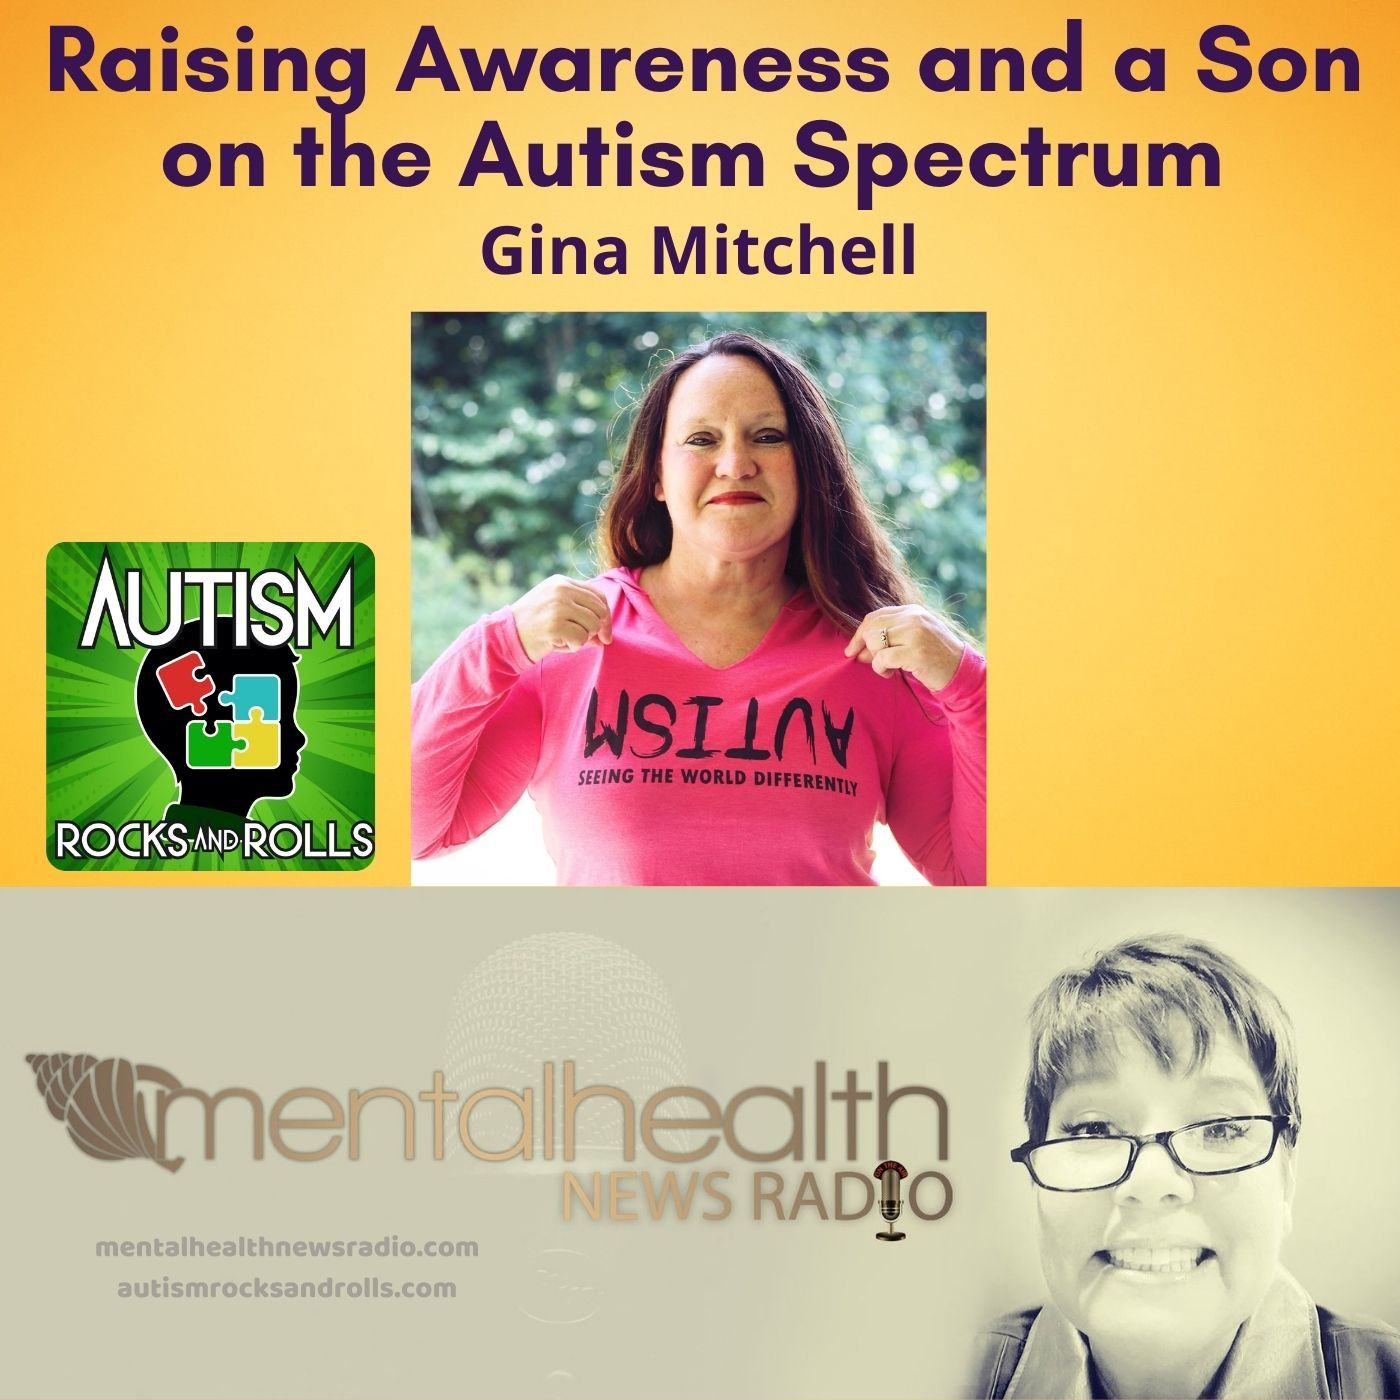 Mental Health News Radio - Raising Awareness and a Son on the Autism Spectrum